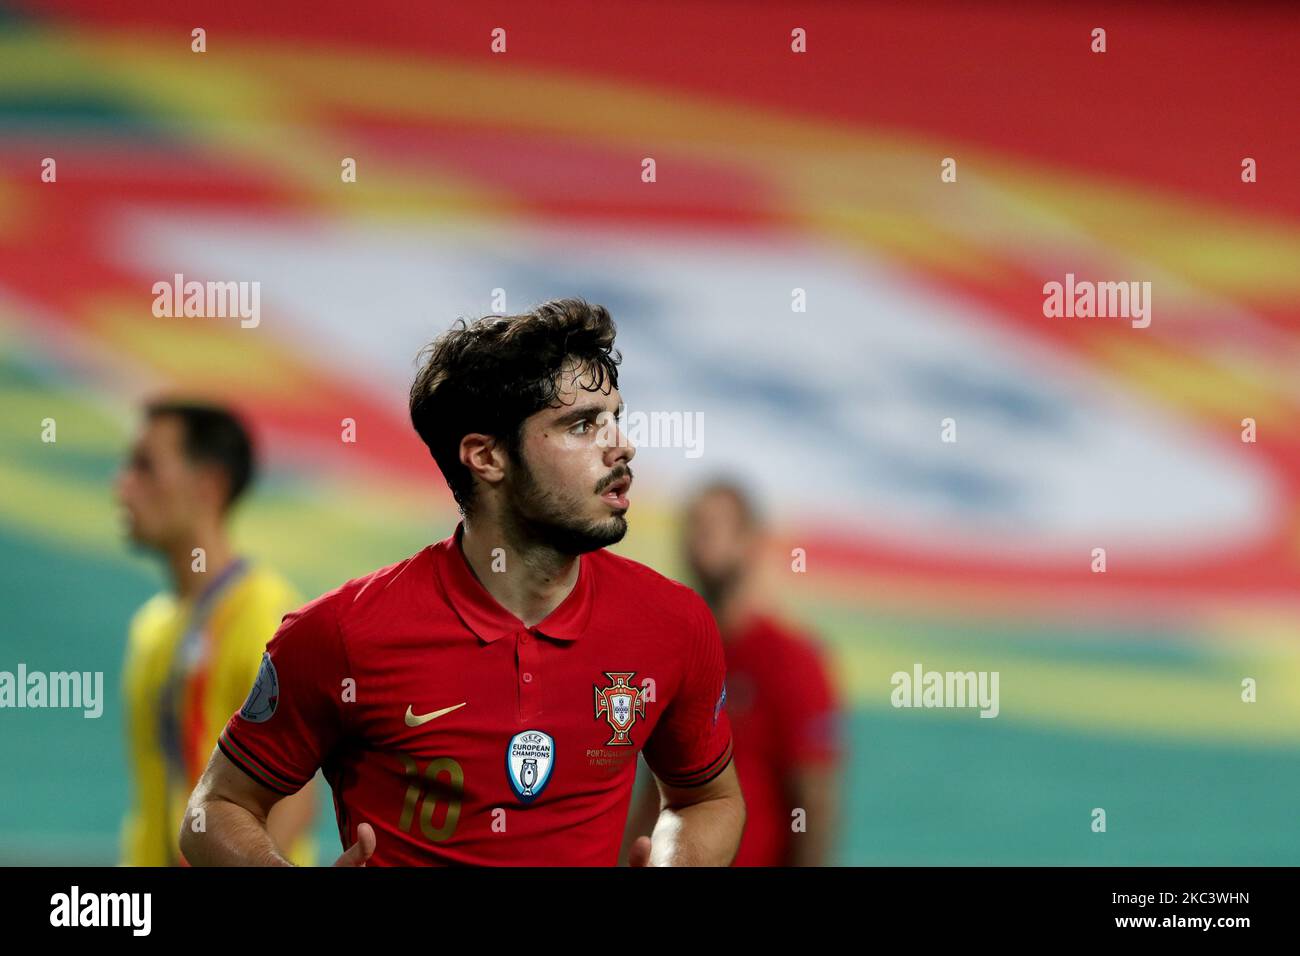 Pedro Neto of Portugal looks on during the friendly football match between Portugal and Andorra, at the Luz stadium in Lisbon, Portugal, on November 11, 2020. (Photo by Pedro FiÃºza/NurPhoto) Stock Photo